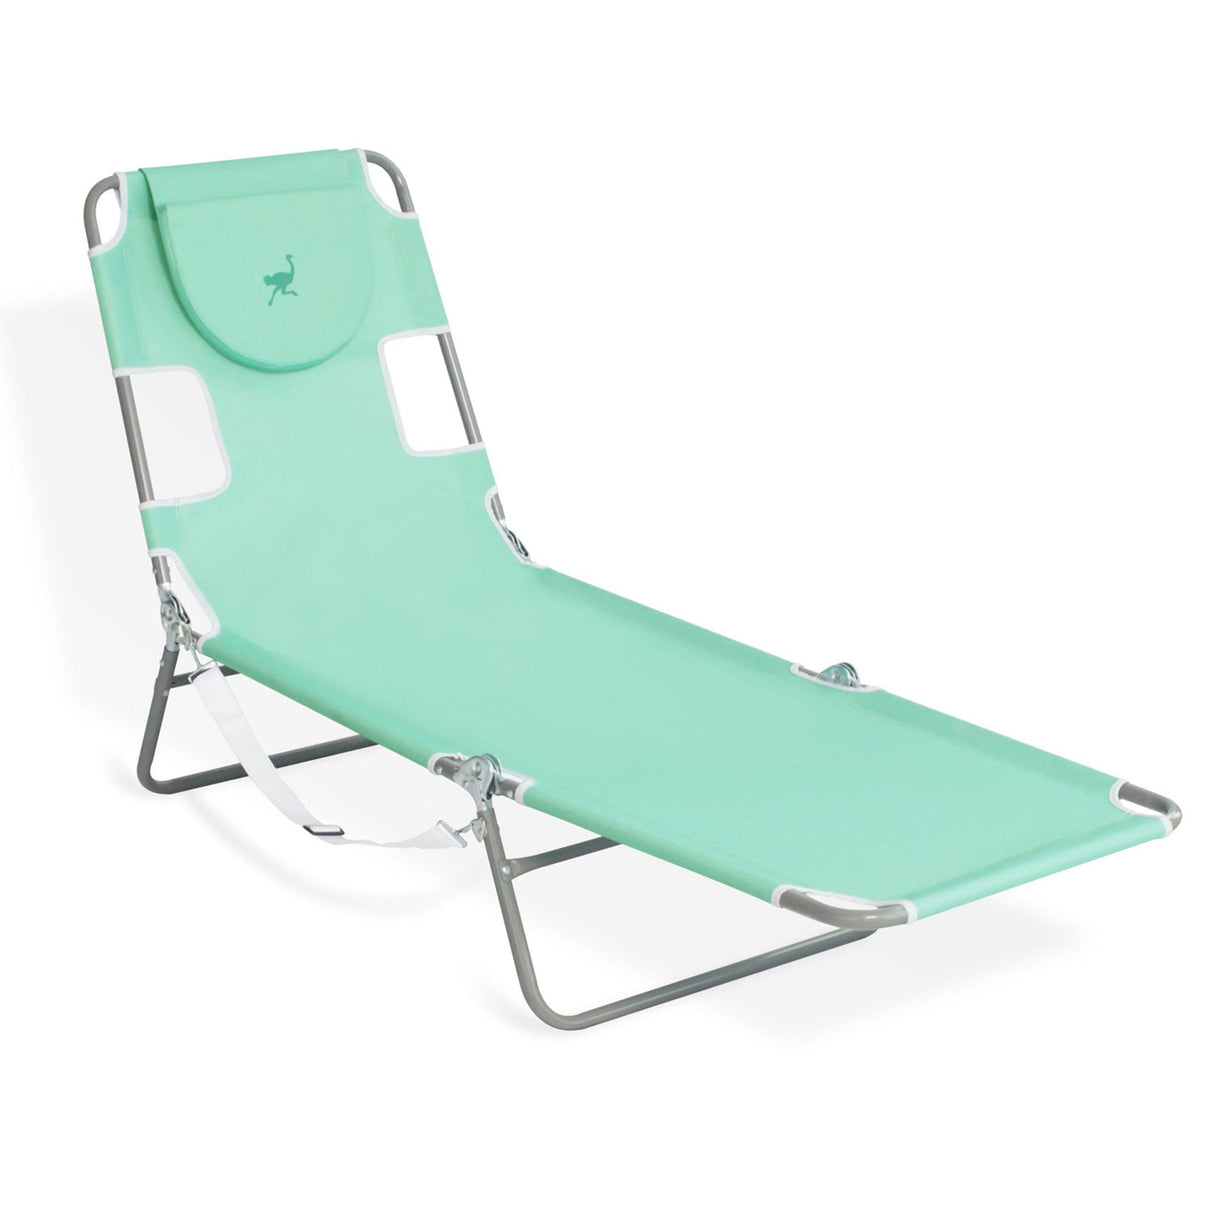 Ostrich Chaise Lounge, Portable Facedown Beach Camping Pool Tanning Chair, Teal